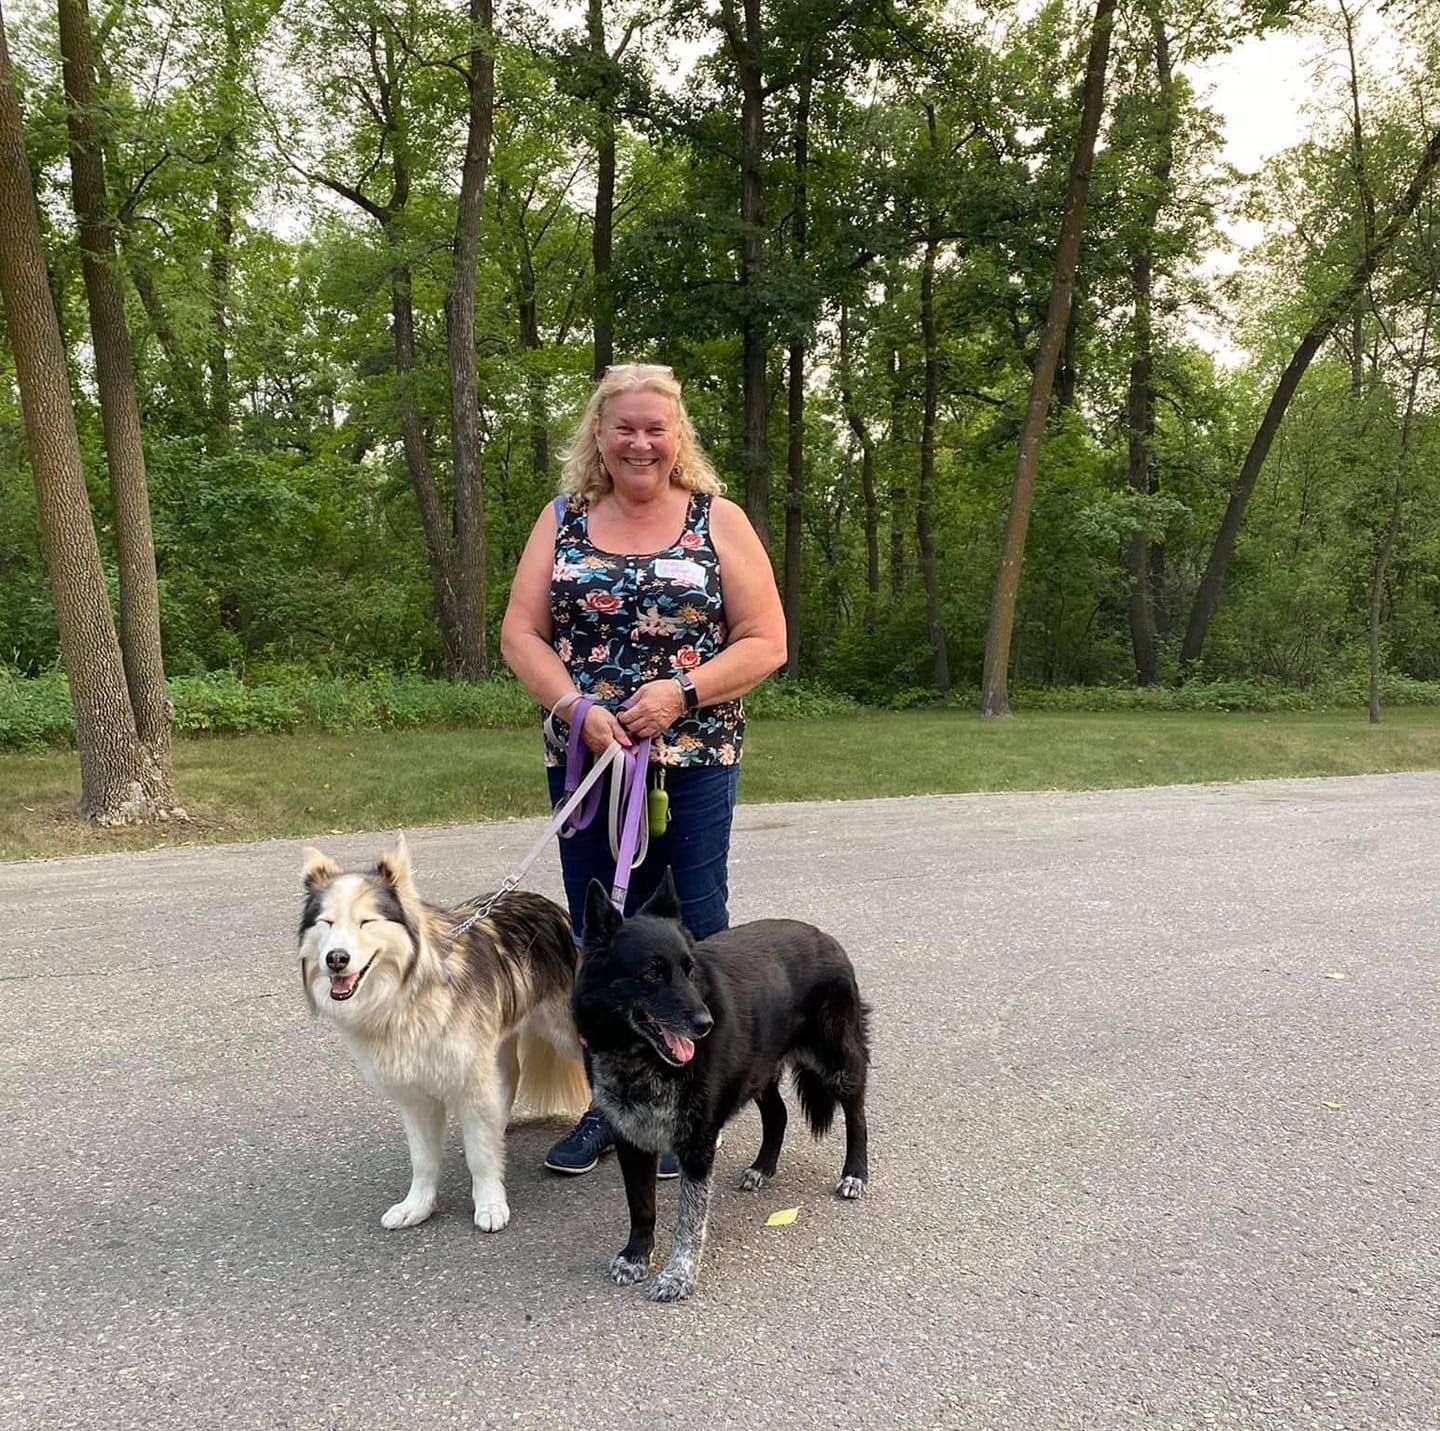 Me and my girls, Sugar and Clover, at St. Vital Park on a group dog walk with Woofs n' Wags